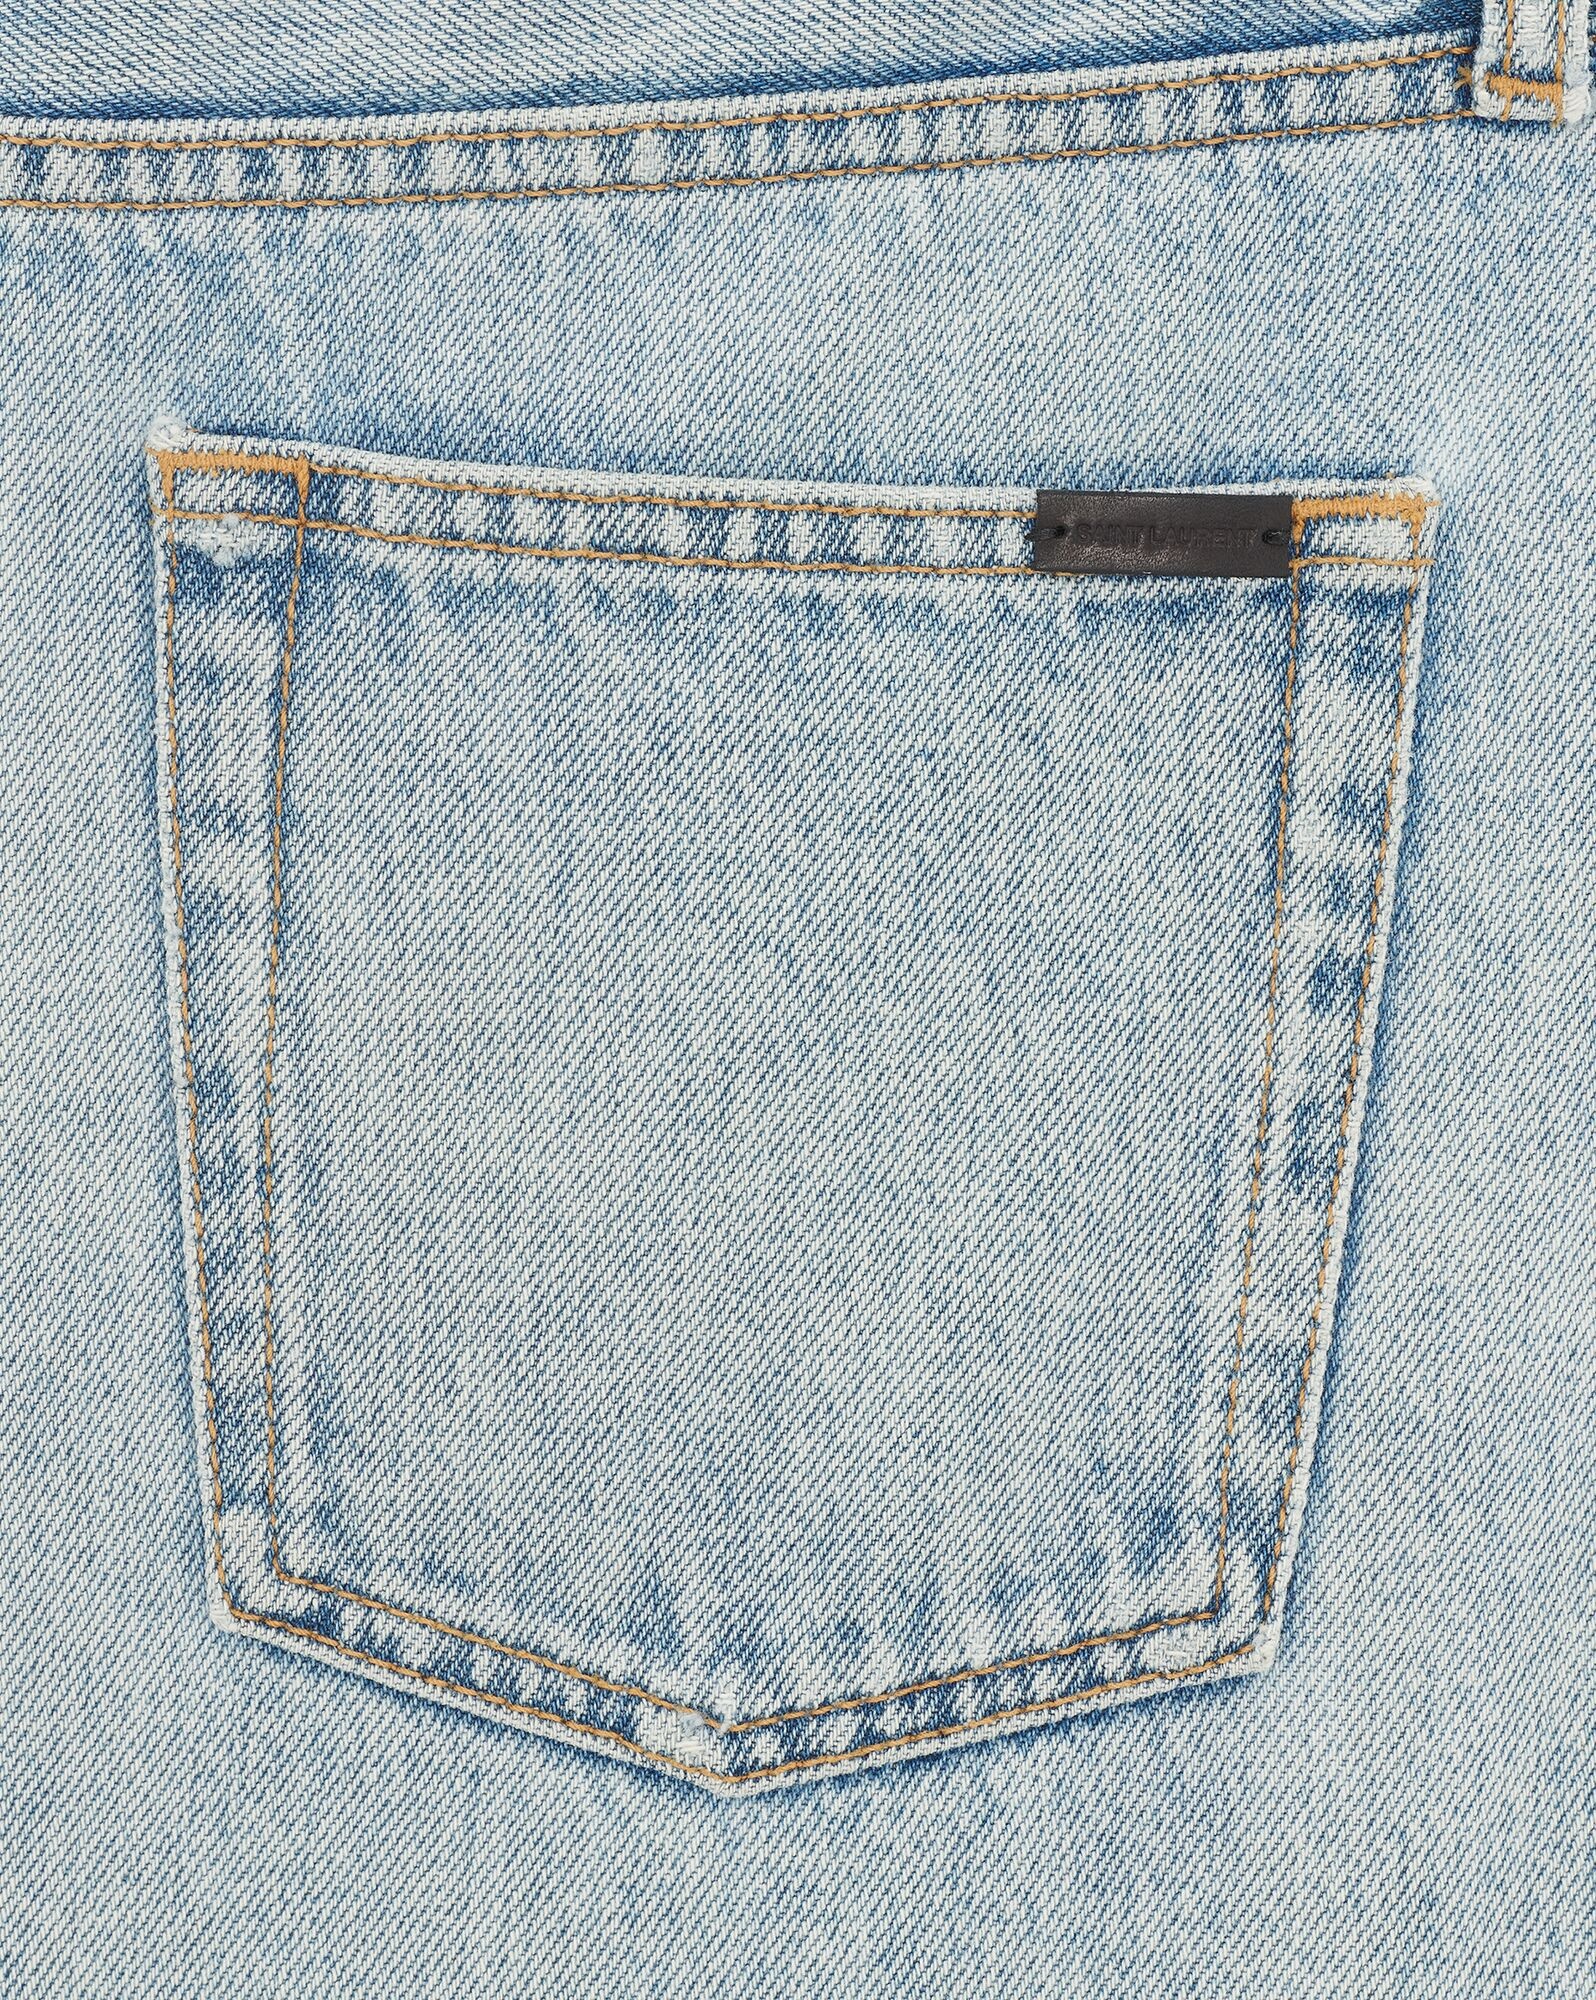 relaxed-fit shorts in tuscon blue denim - 4